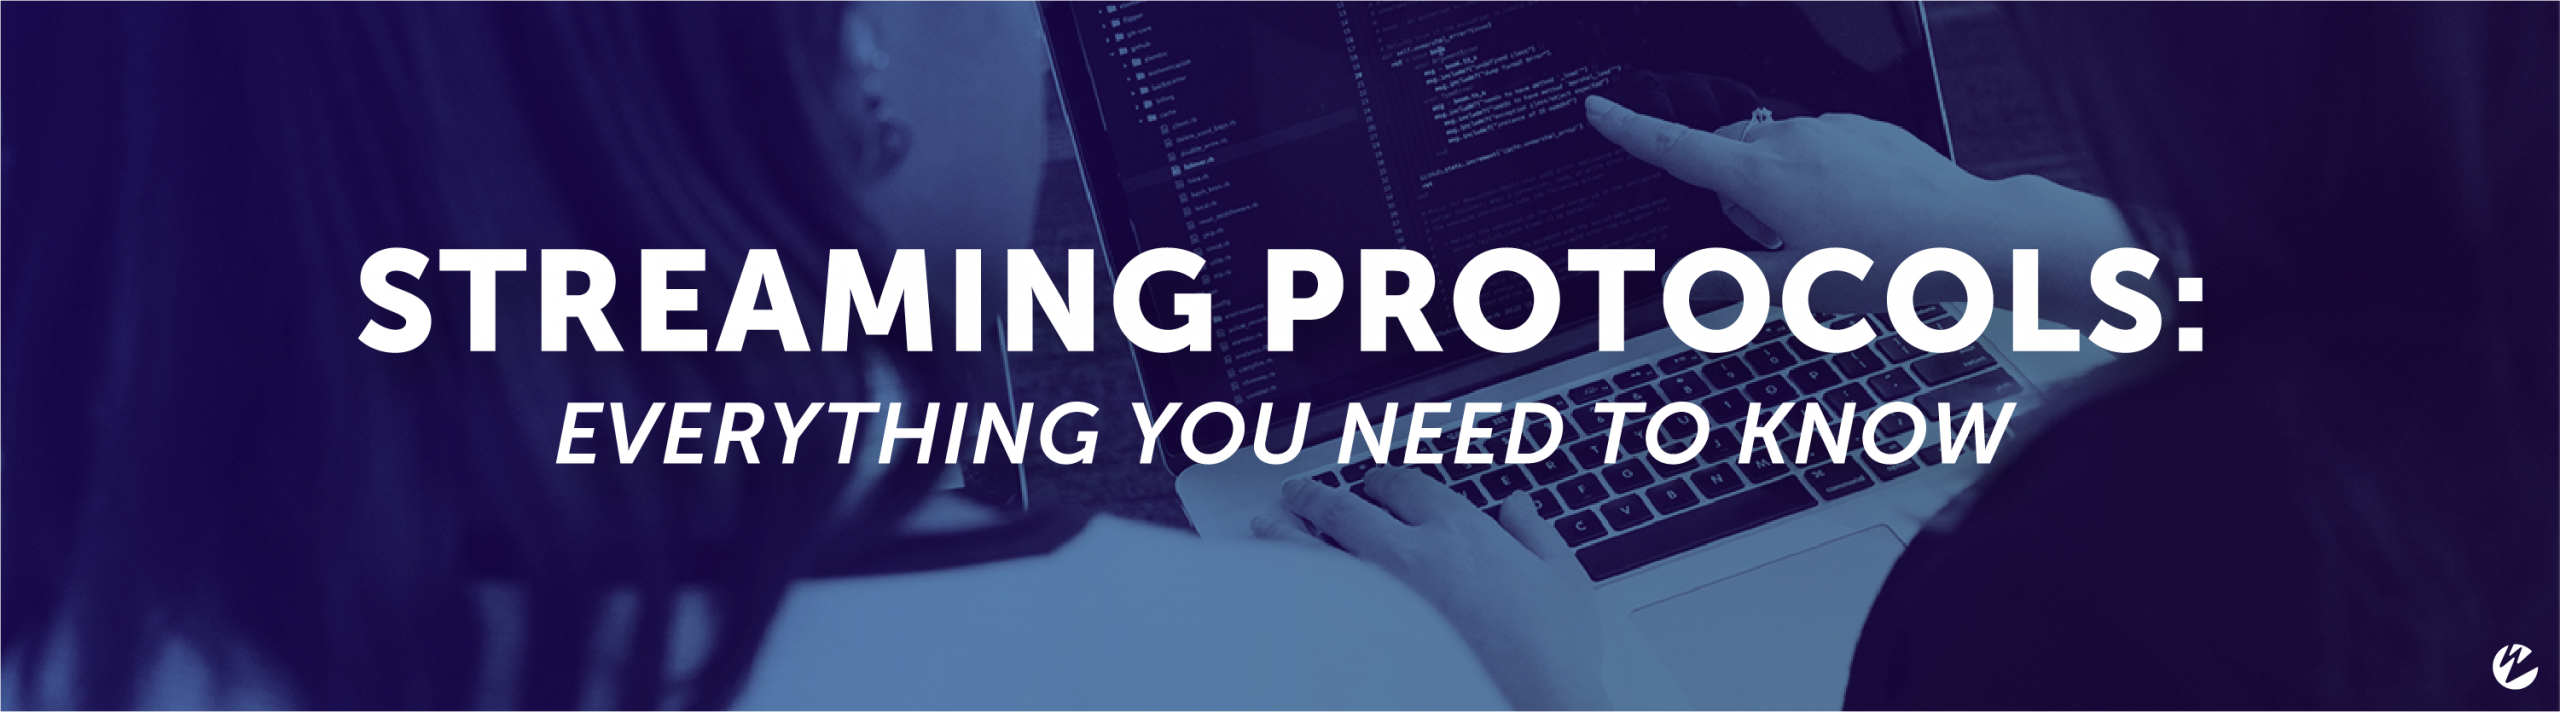 Streaming Protocols: Everything You Need to Know